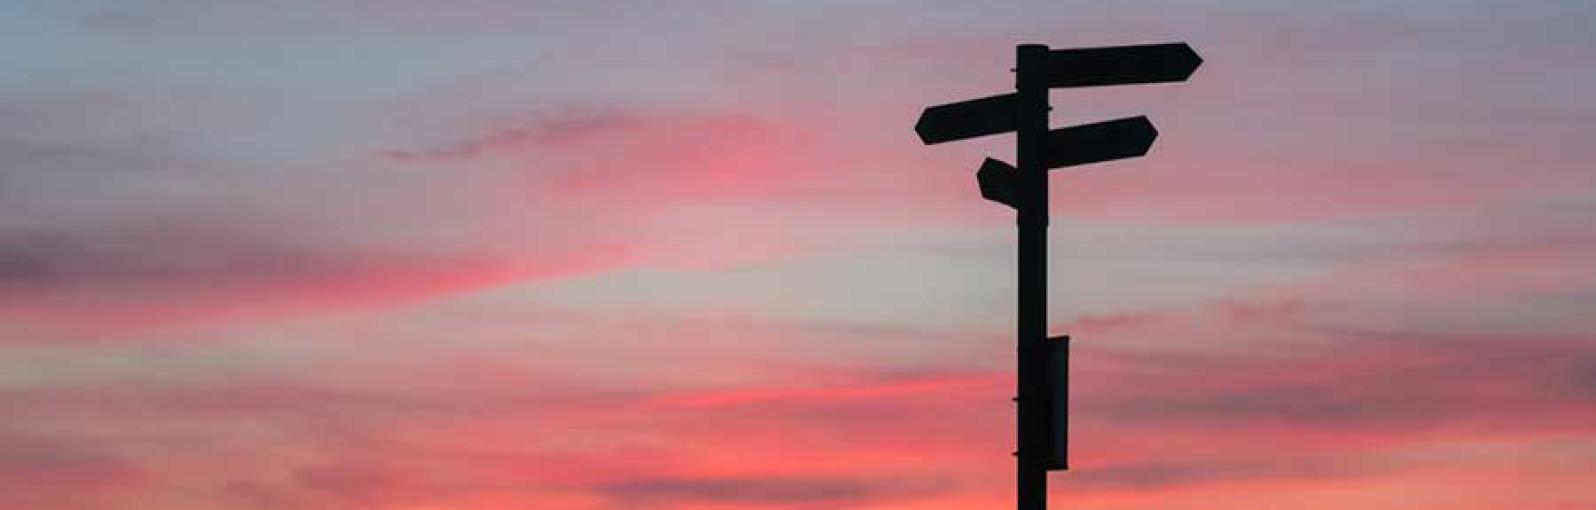 A signpost with a blue and pink sky behind it